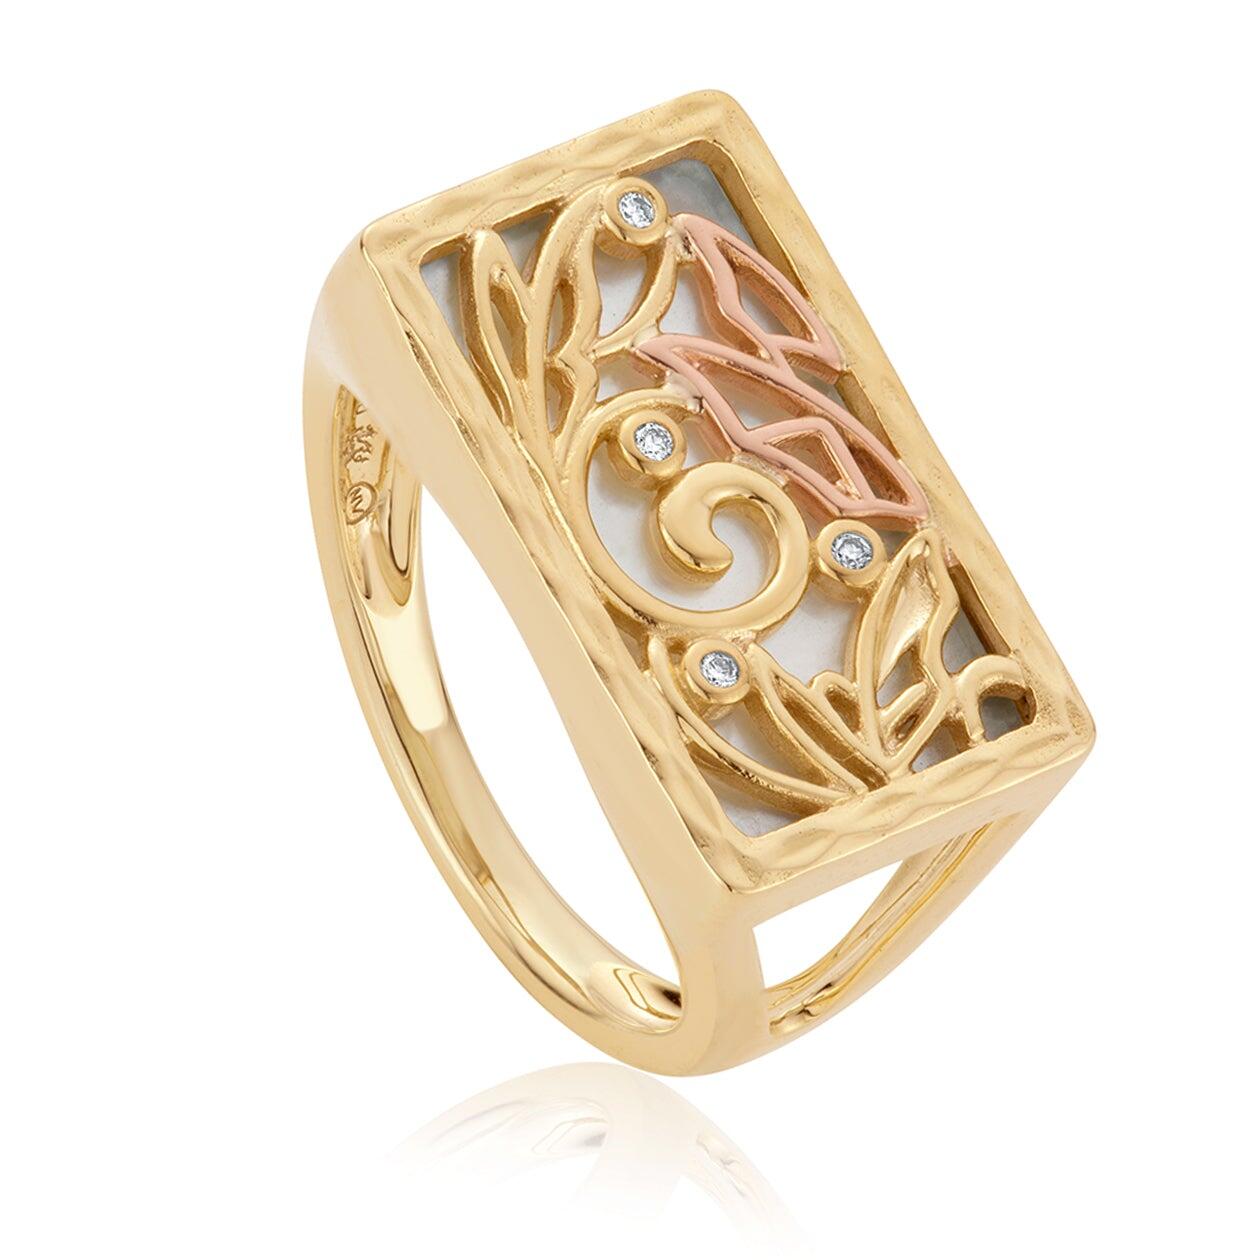 Clogau Tylwyth Teg 9ct Gold White Mother of Pearl Ring - Default Title / Gold